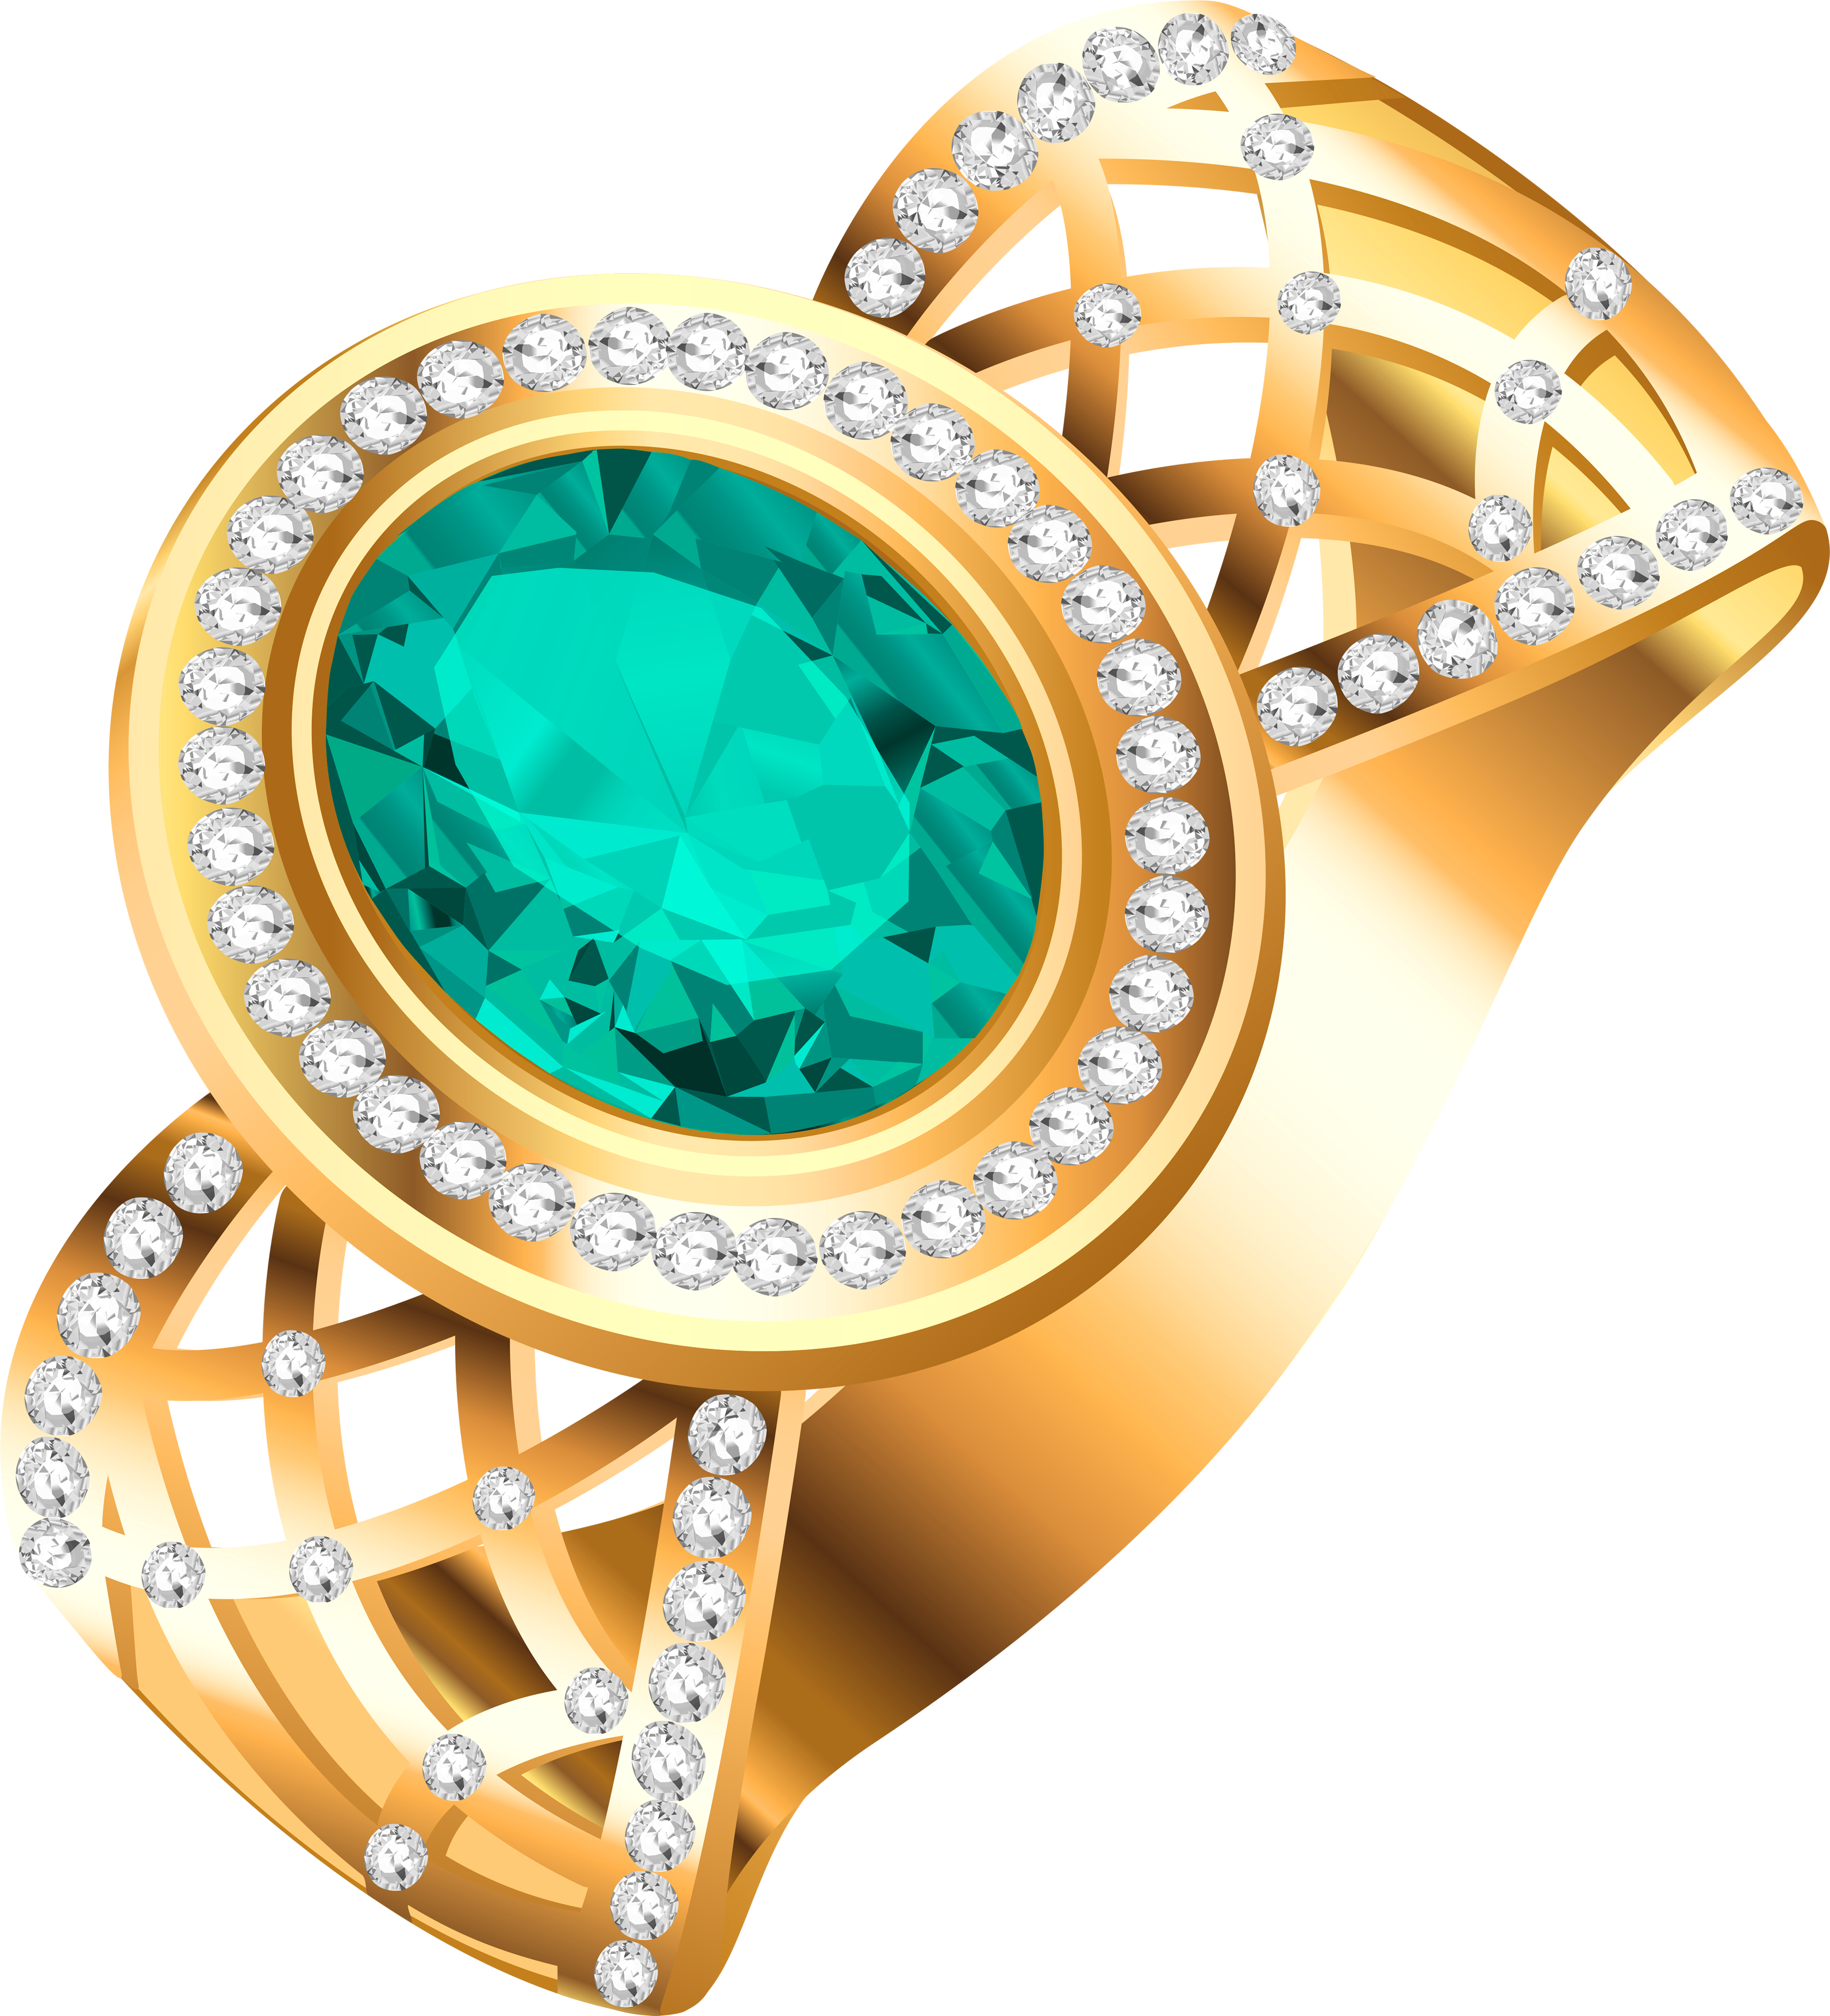 A Gold Ring With A Green Gem